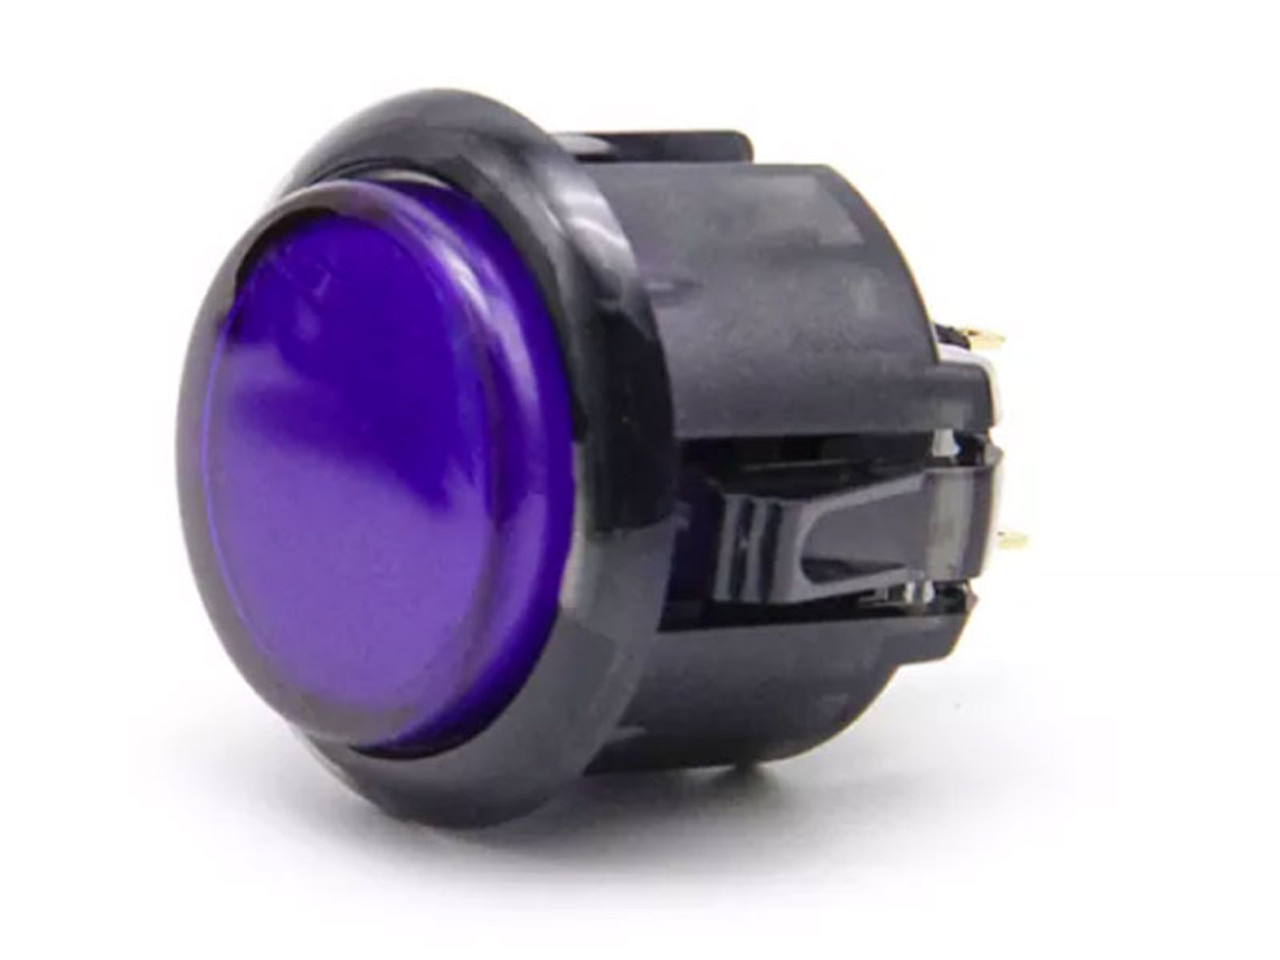 Qanba Gravity 24-KS 24mm Snap-in Clear Mechanical Pushbutton - Clear Violet  Black